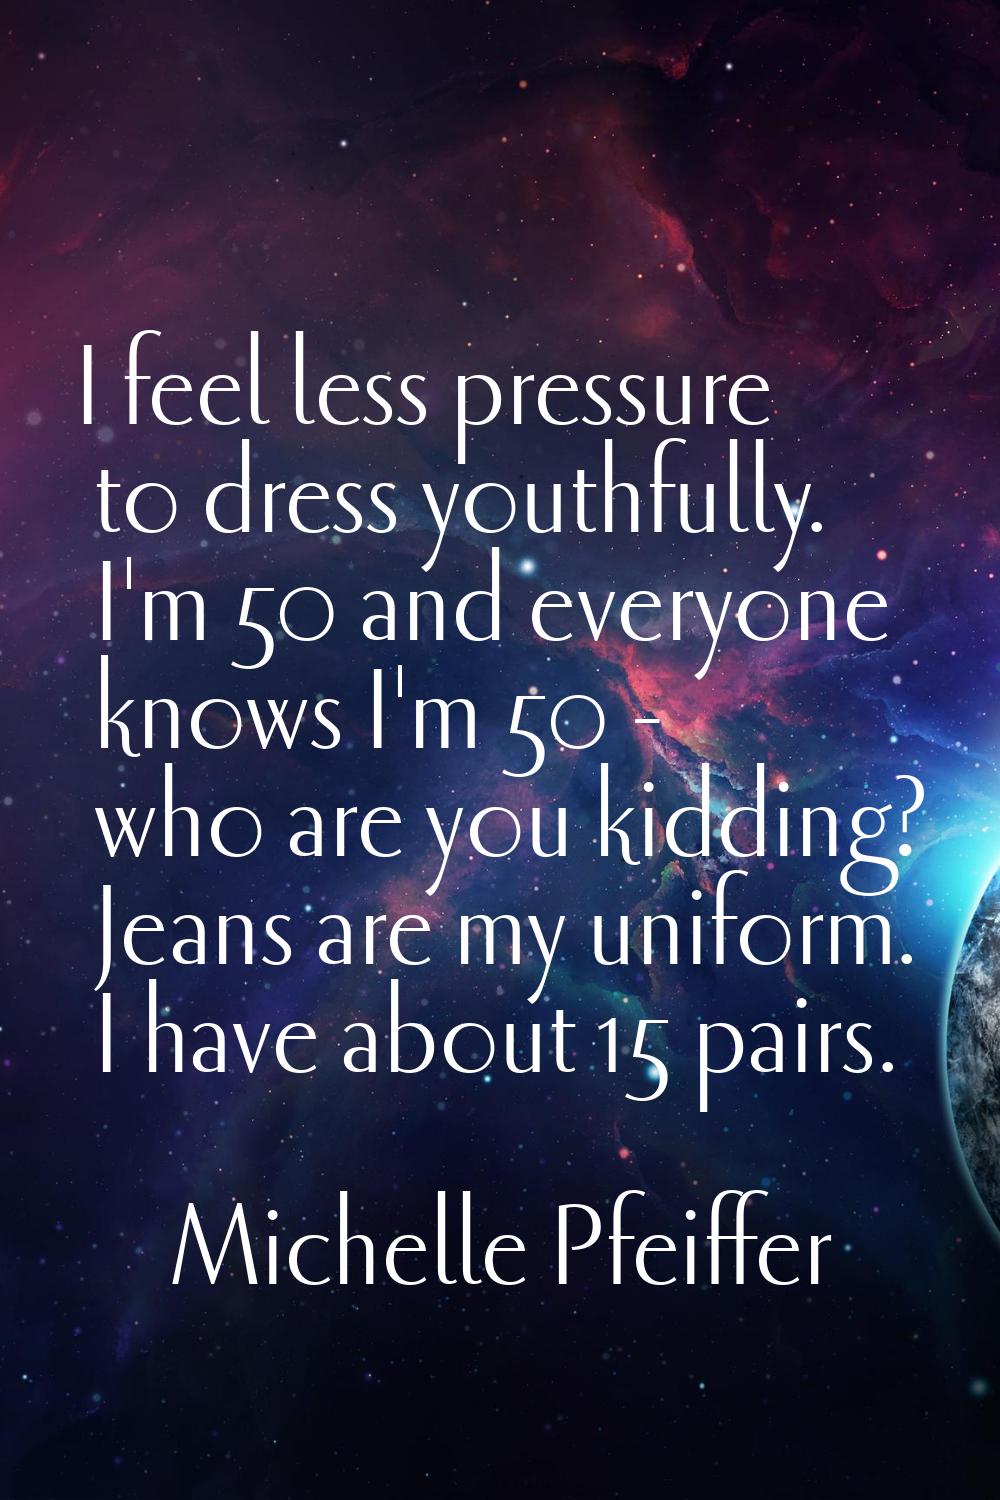 I feel less pressure to dress youthfully. I'm 50 and everyone knows I'm 50 - who are you kidding? J